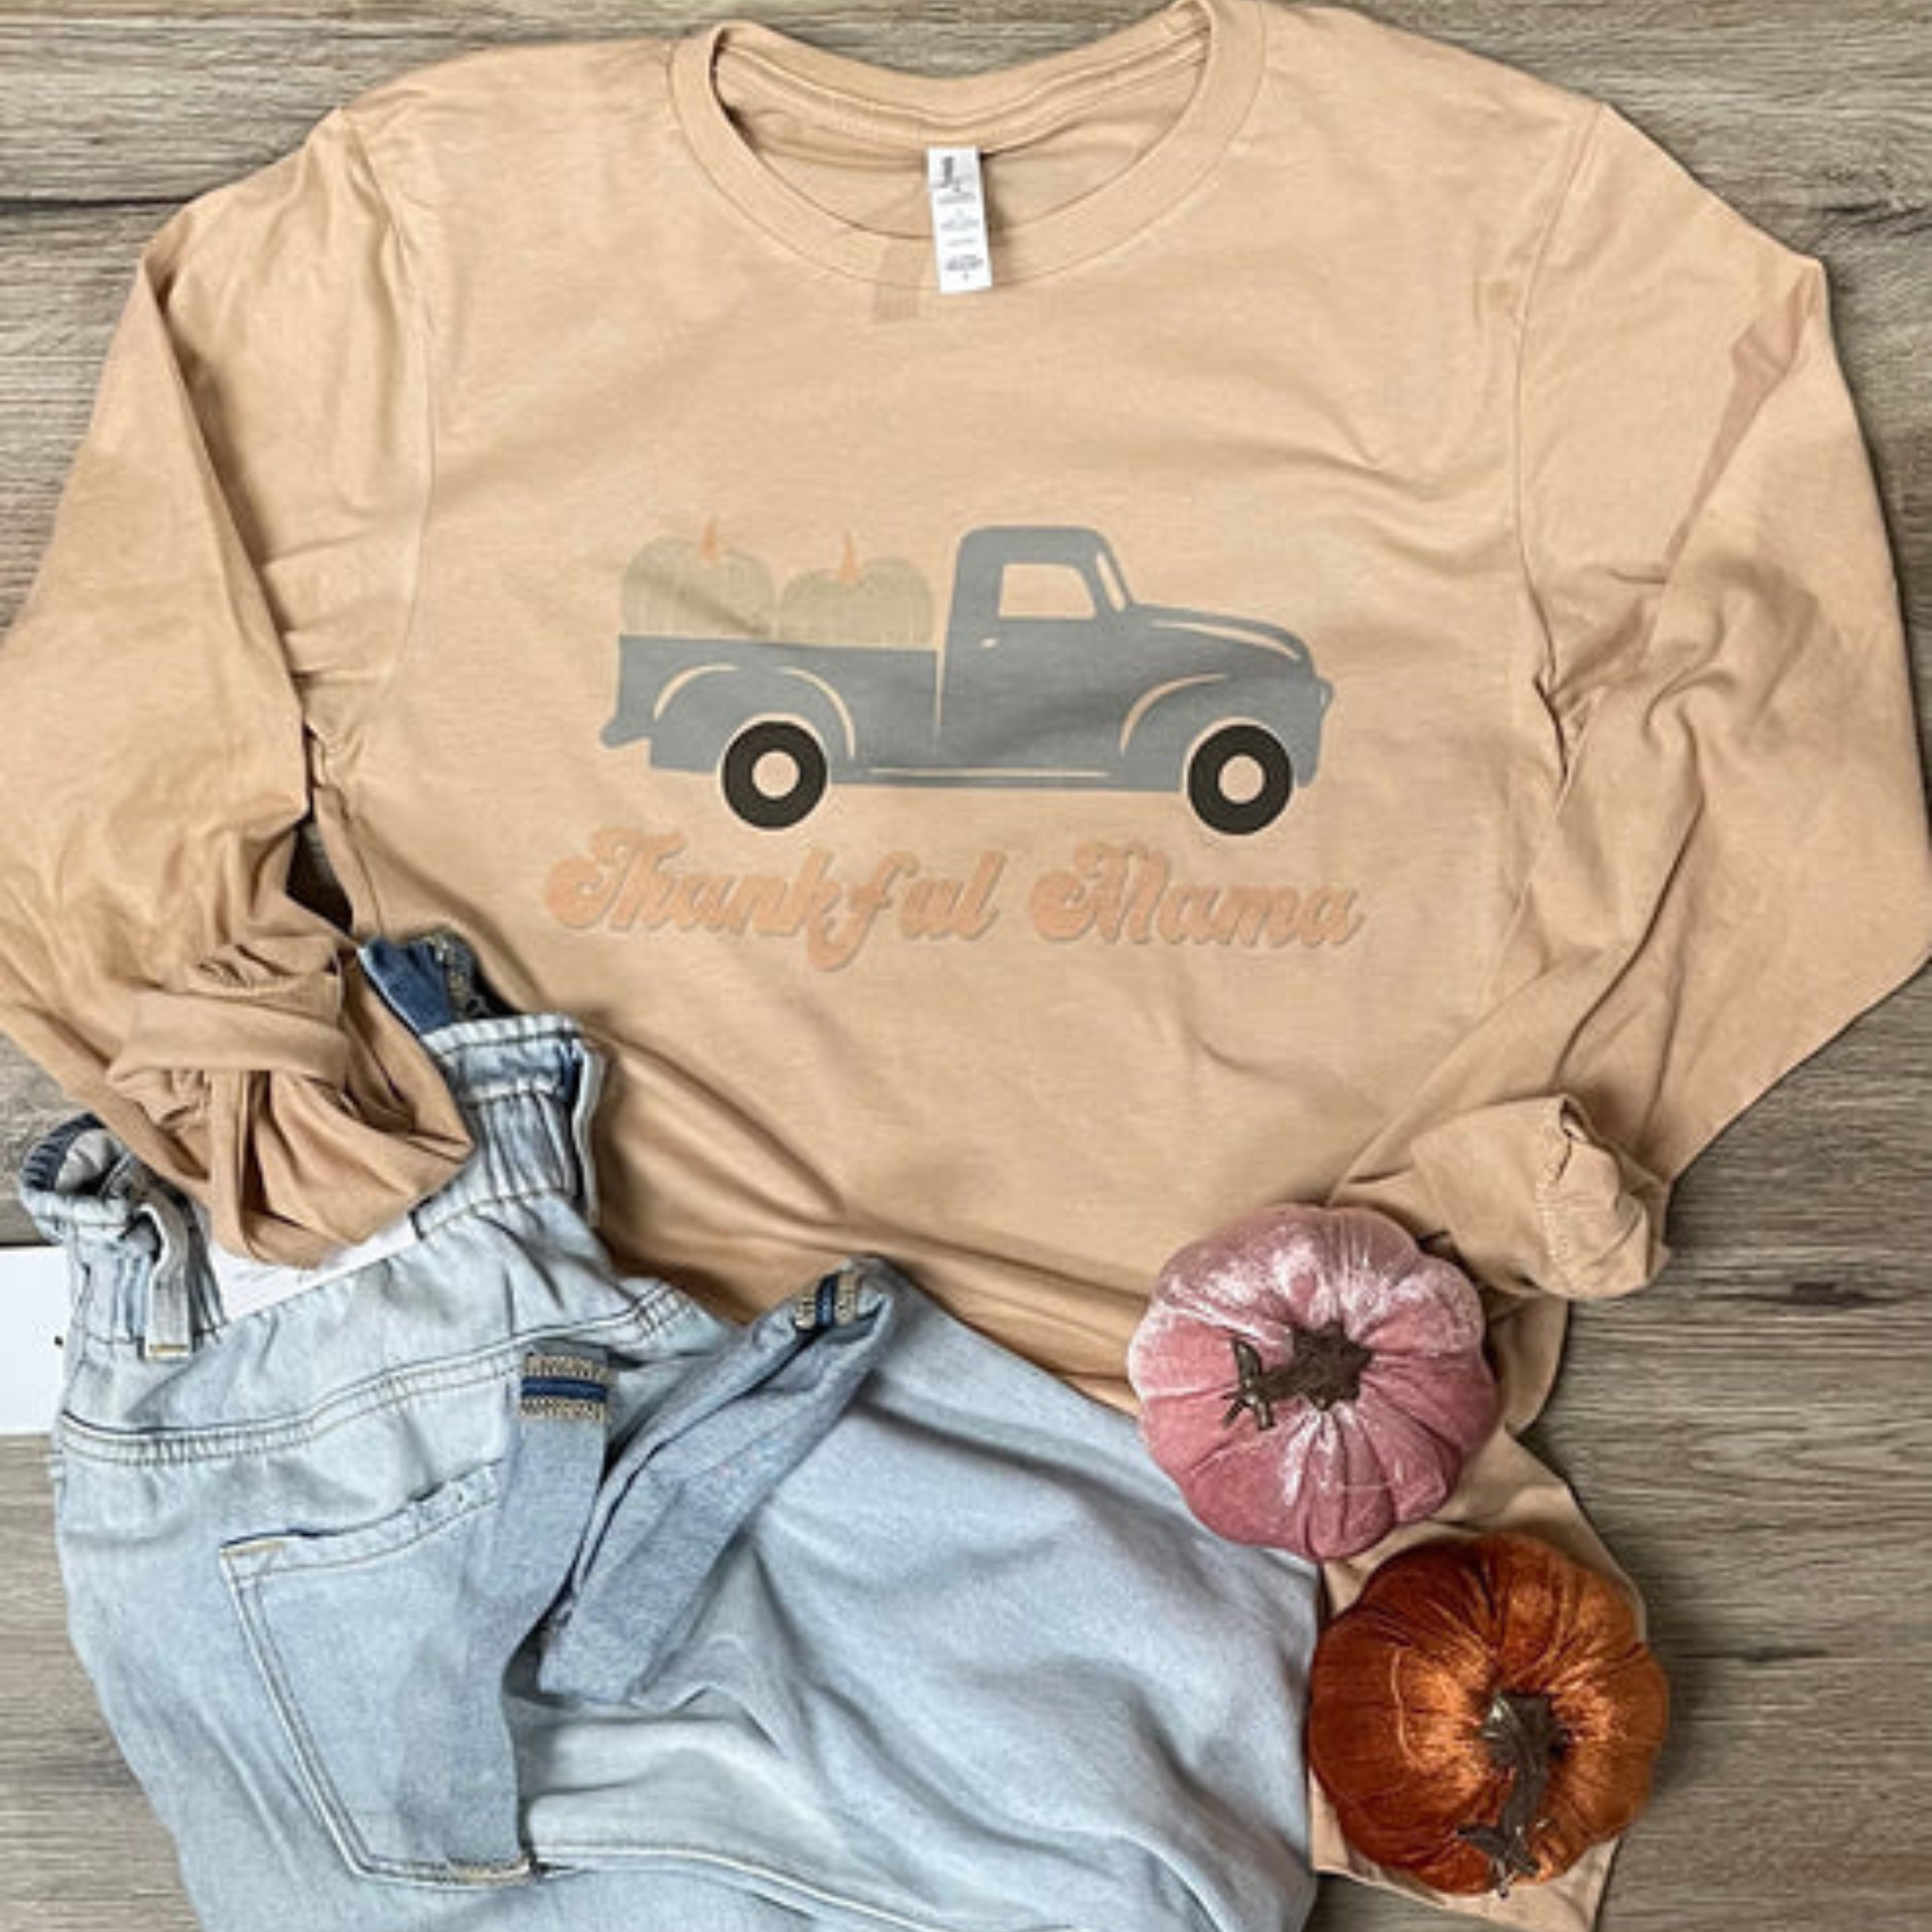 This cream long sleeve graphic tee from Bella + Canvas is crew neck and features a graphic of a Fall blue truck with two pumpkins in the end. Under the truck is the words "Thankful Mama" in pastel orange. This long sleeve graphic tee is shown paired with light wash denim jeans. 